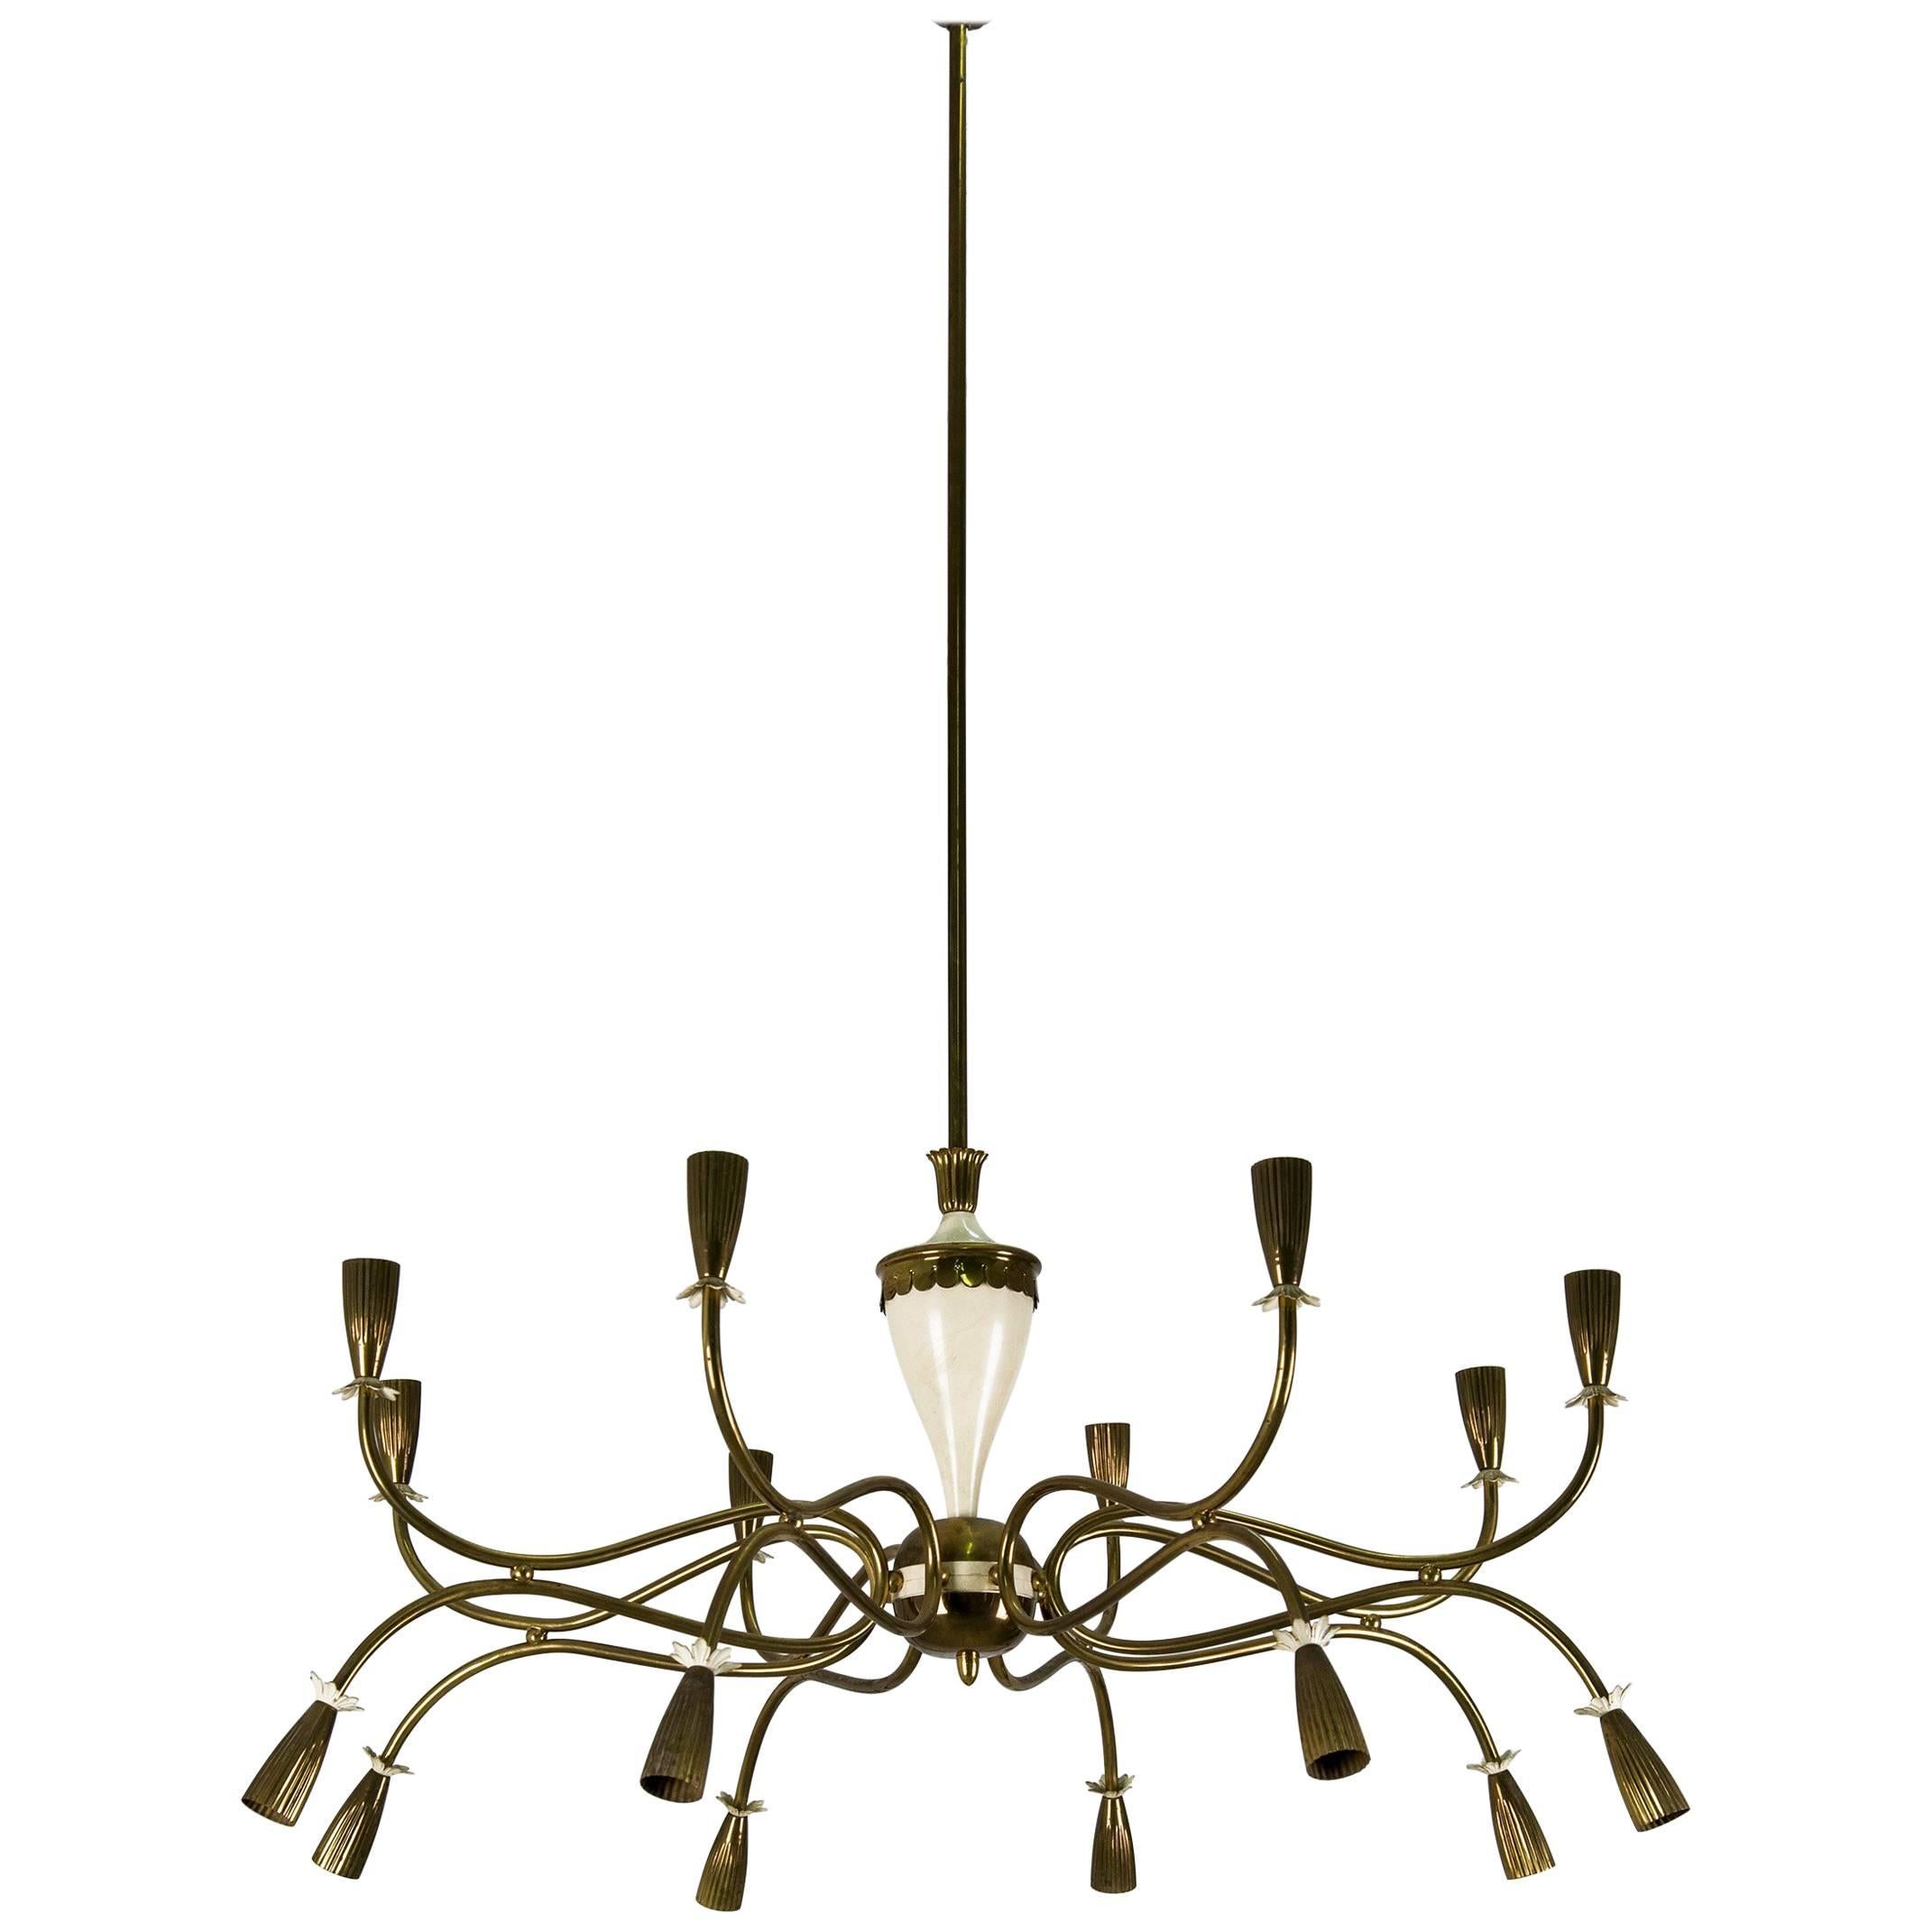 Large 1950s Sixteen-Light Chandelier in the Style of Paolo Buffa